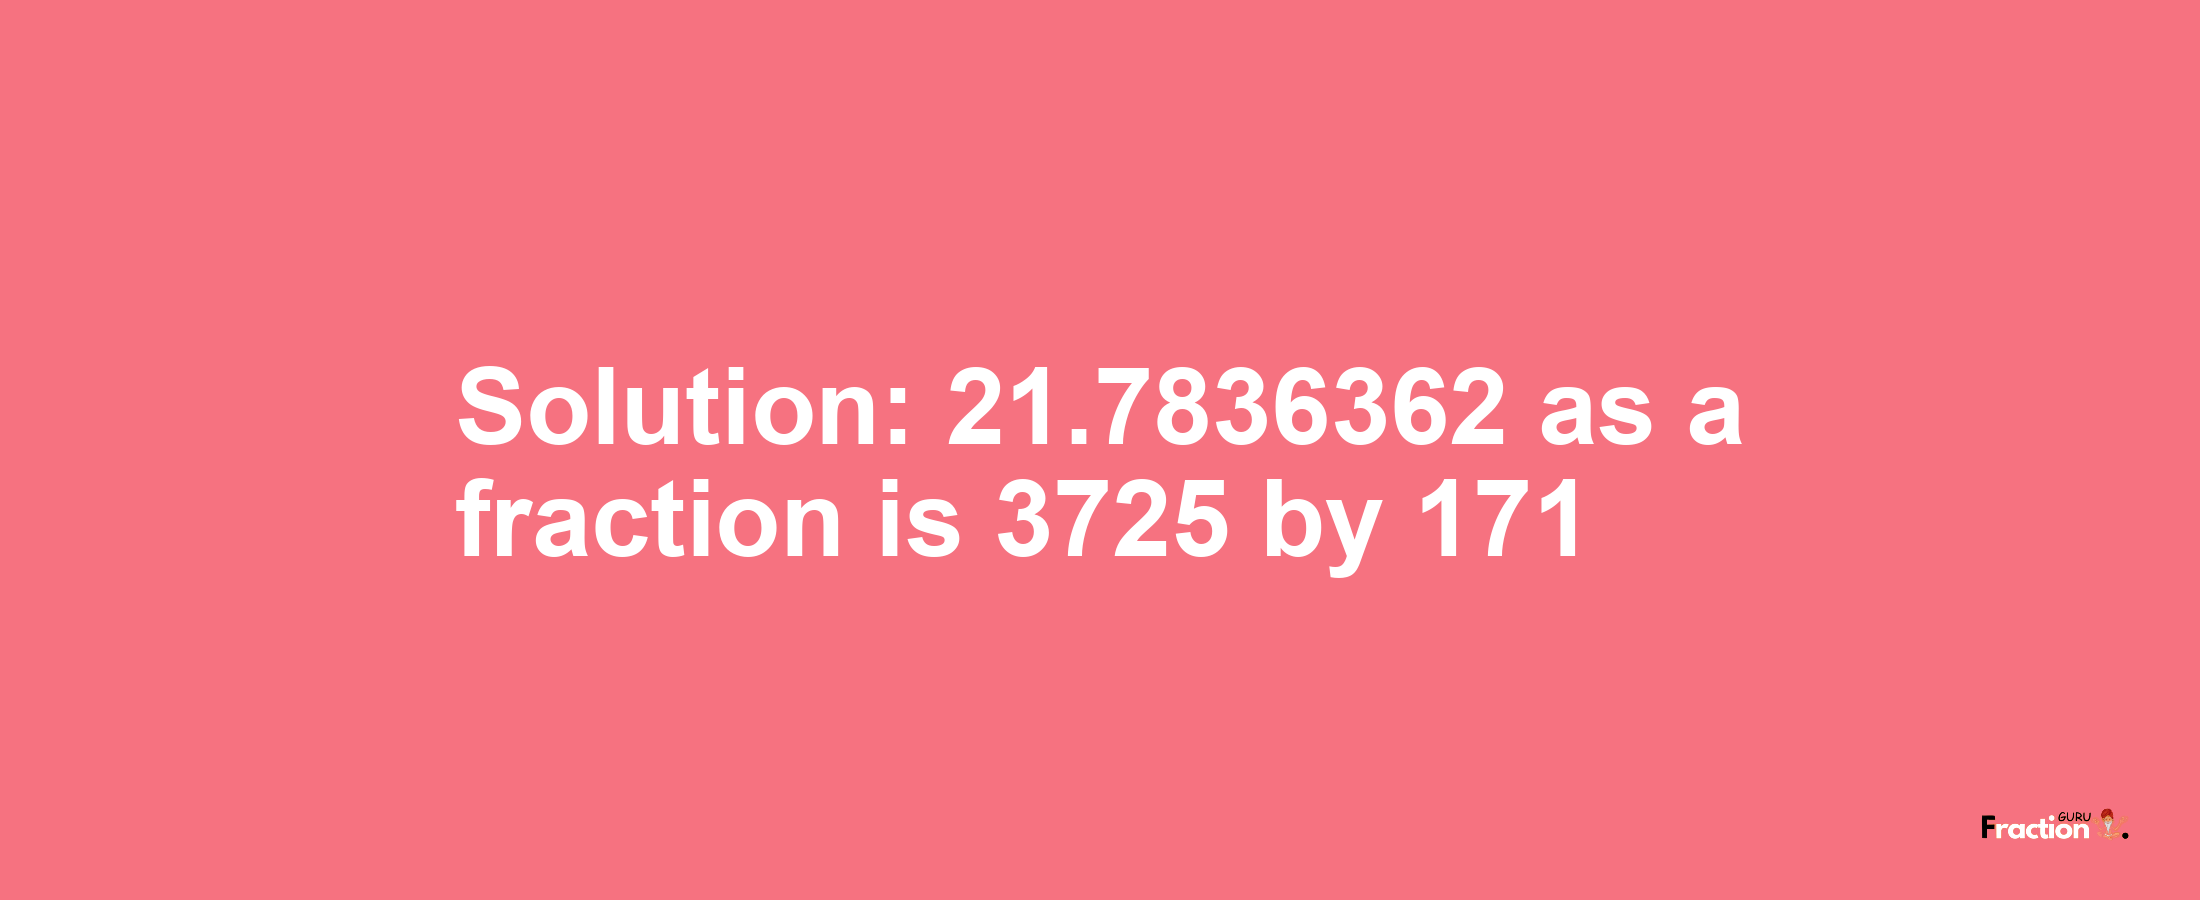 Solution:21.7836362 as a fraction is 3725/171